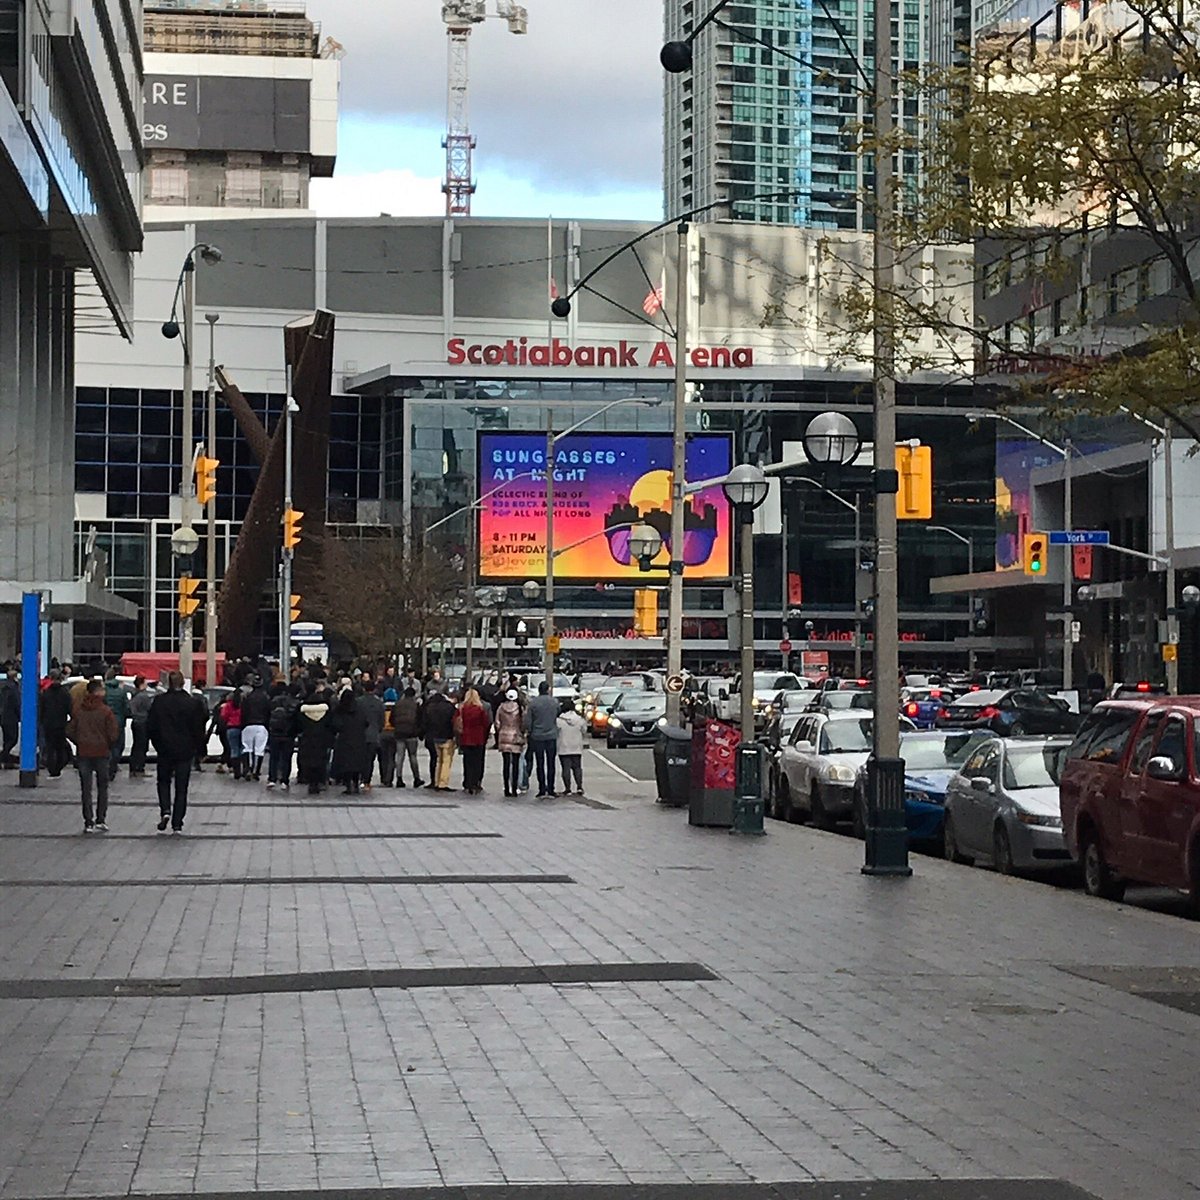 Scotiabank Arena in Downtown Toronto - Tours and Activities